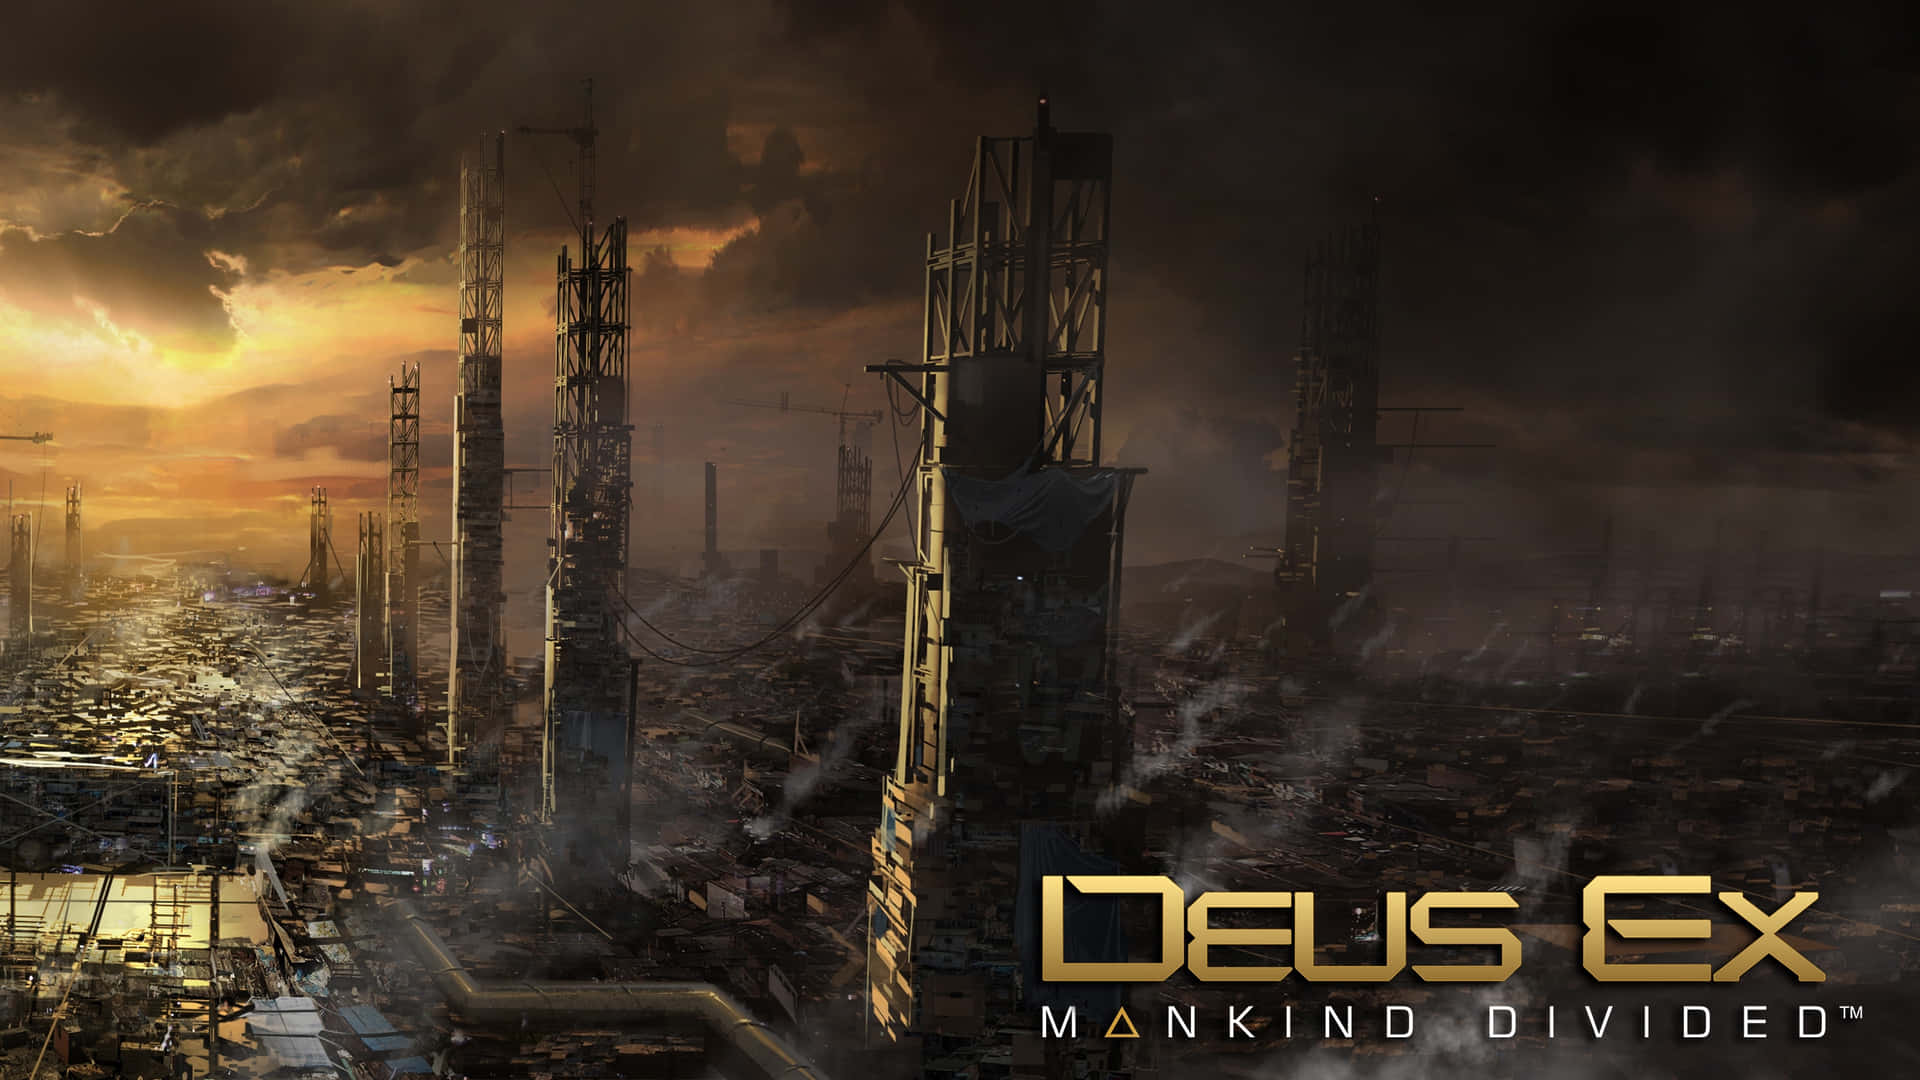 Mankind Divided - Two Sides, One Humanity